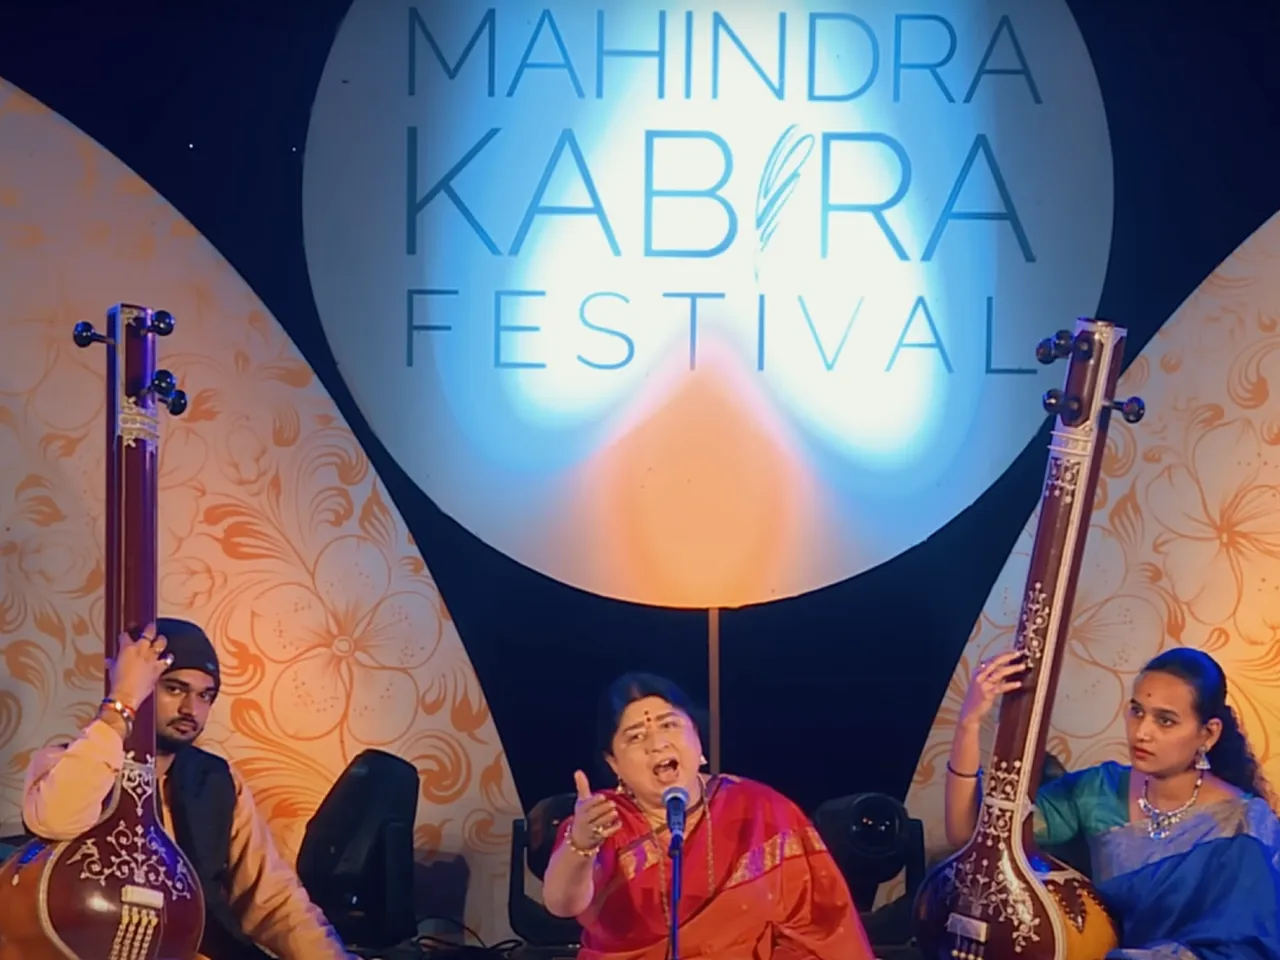 Mahindra Group celebrates India’s cultural richness & diversity with #MahindraSeasonOfFestivals